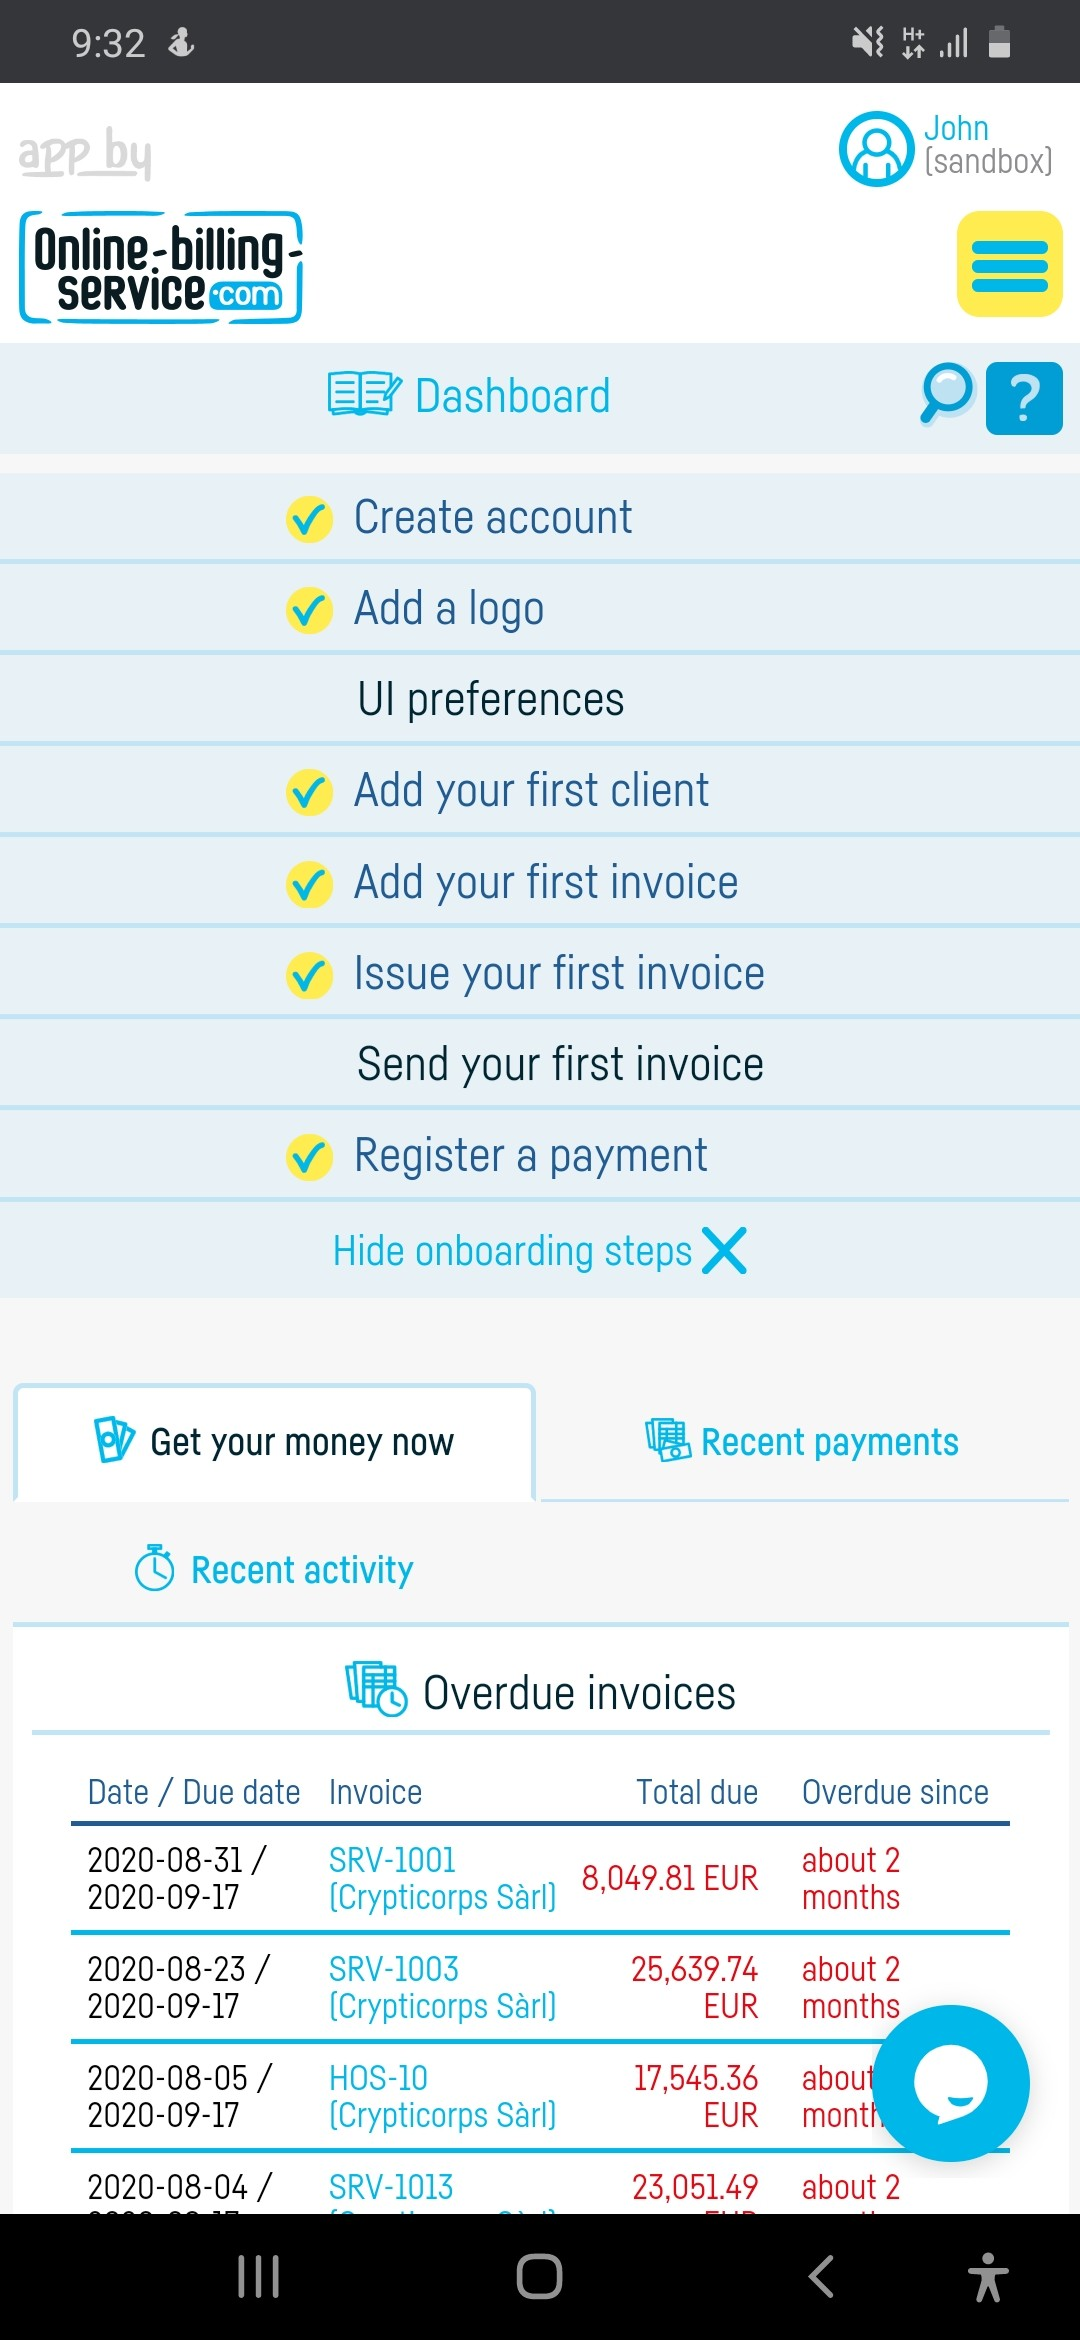 Managing invoices / documents - step 1